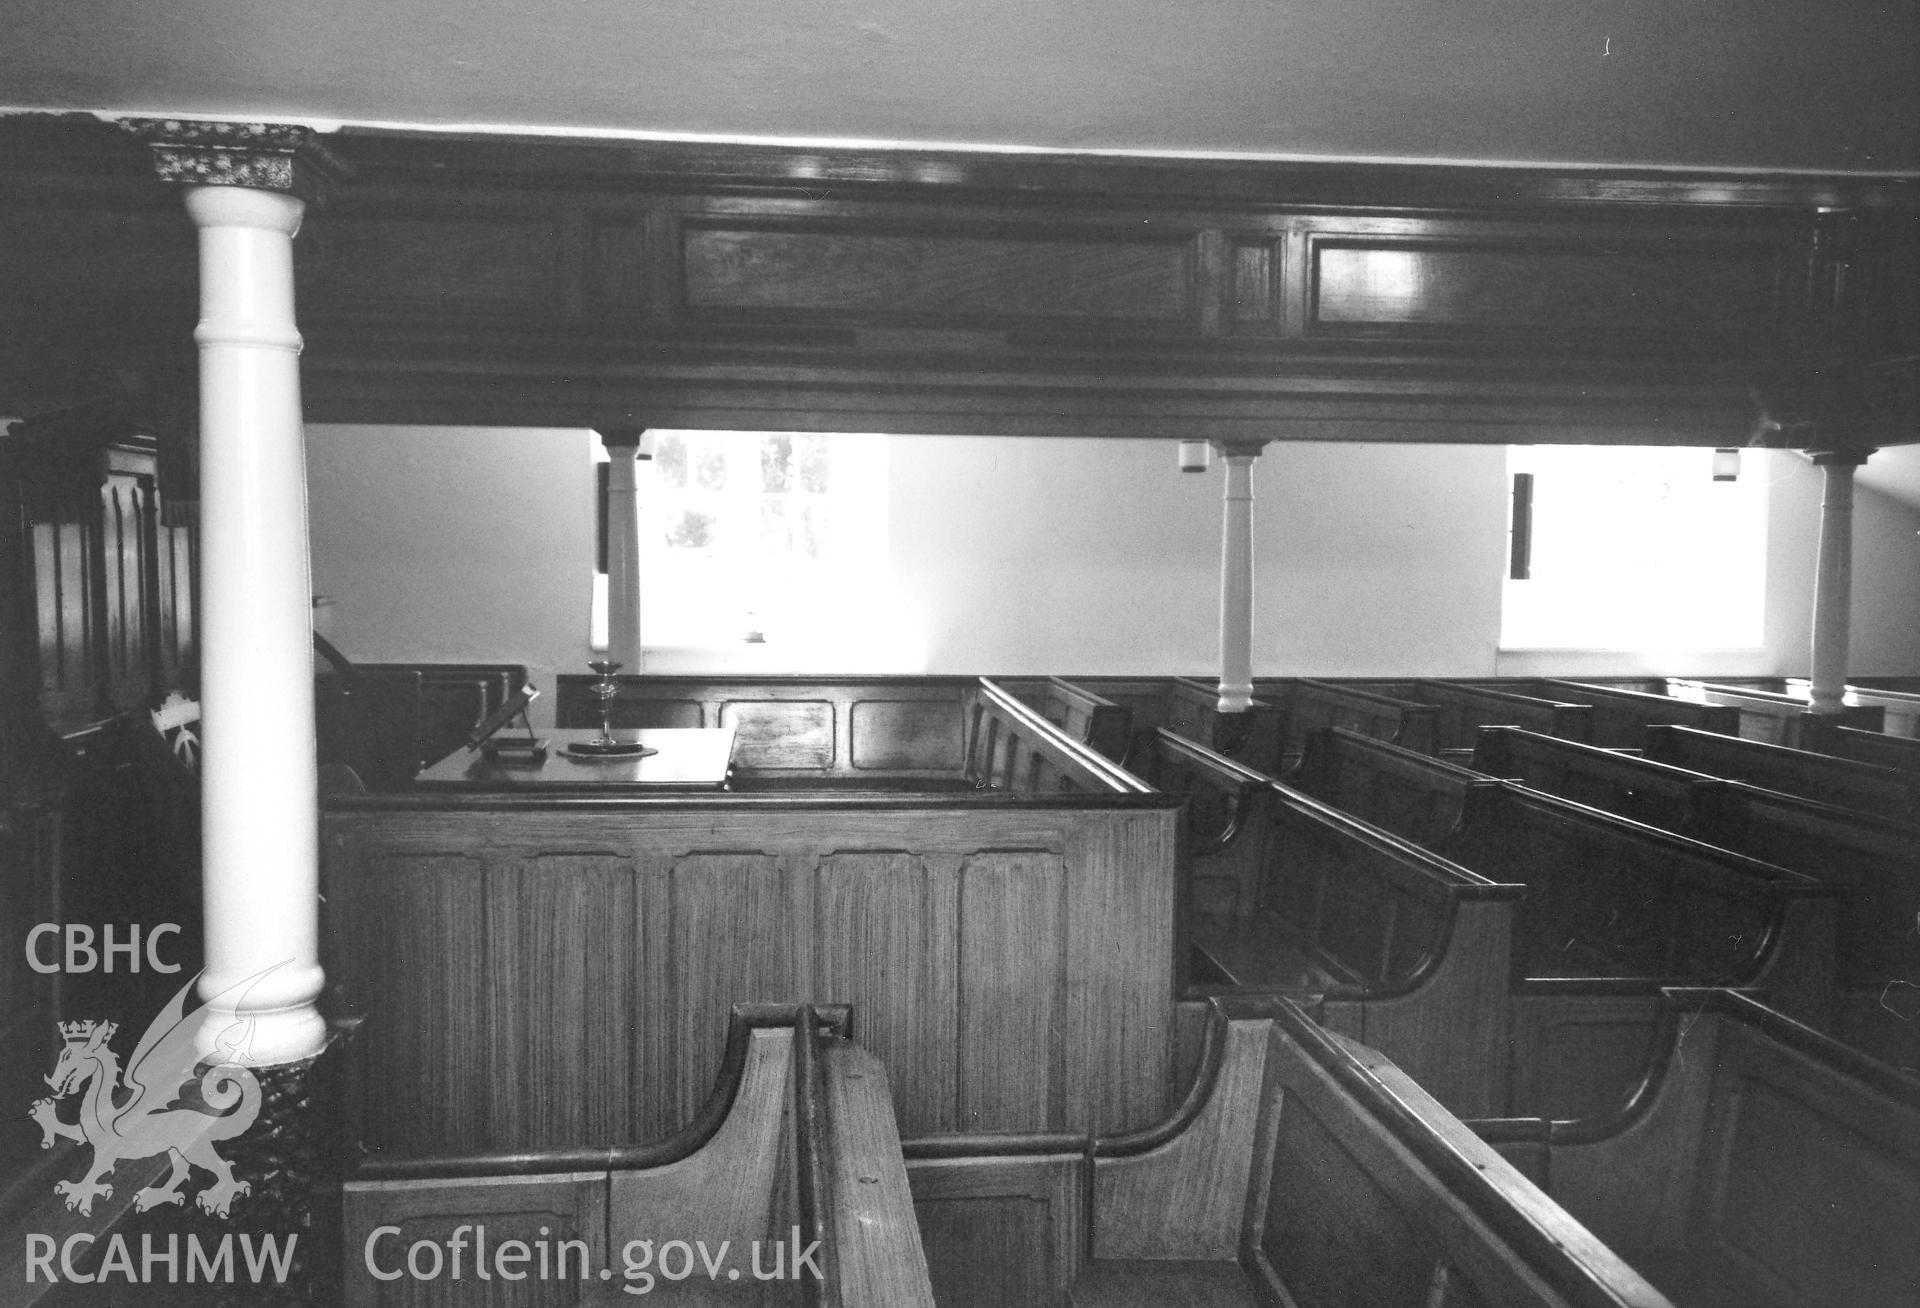 Digital copy of a black and white photograph showing a general interior view of Saron Welsh Baptist Chapel, Letterston, taken by Robert Scourfield, 1996.